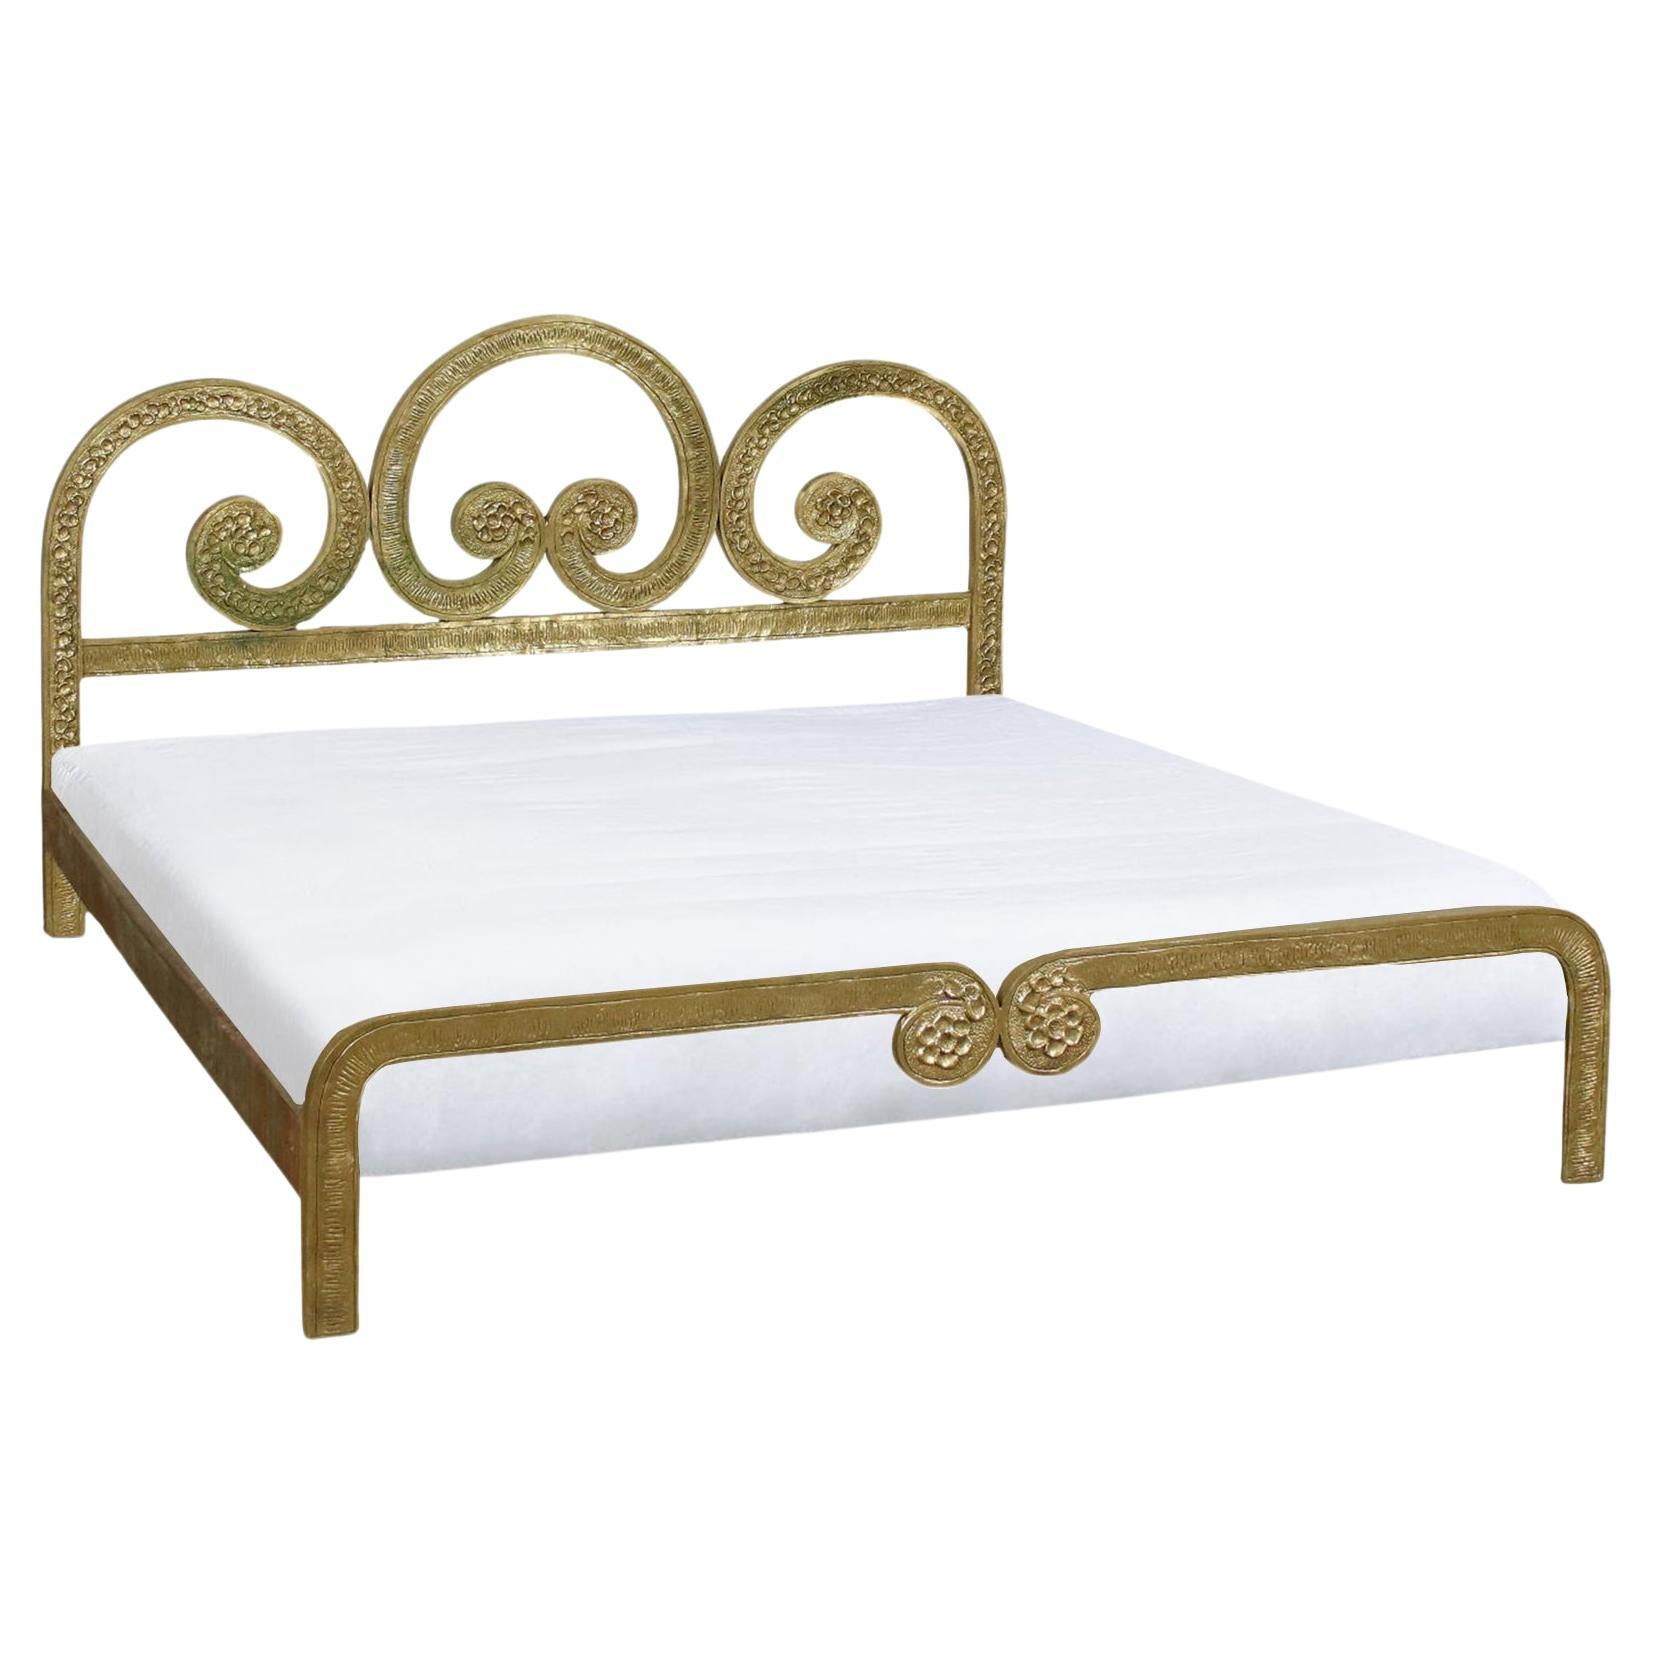 Double Bed Frame in Cast Bronze by Angelo Brotto for Esperia, Italy, circa 1970